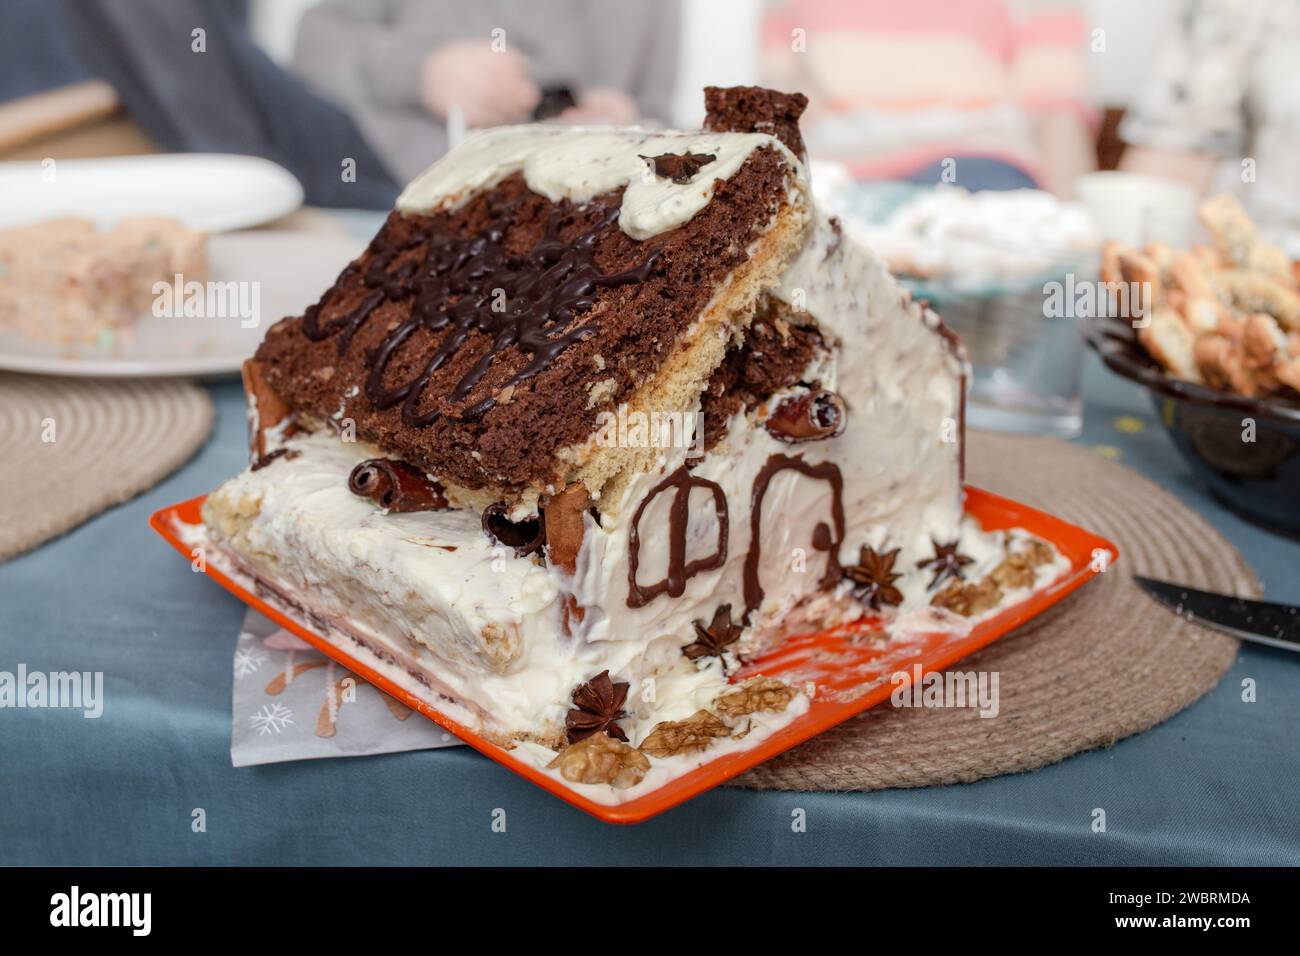 Sponge cake with chocolate and whipped cream made in the shape of a house, soft focus Stock Photo